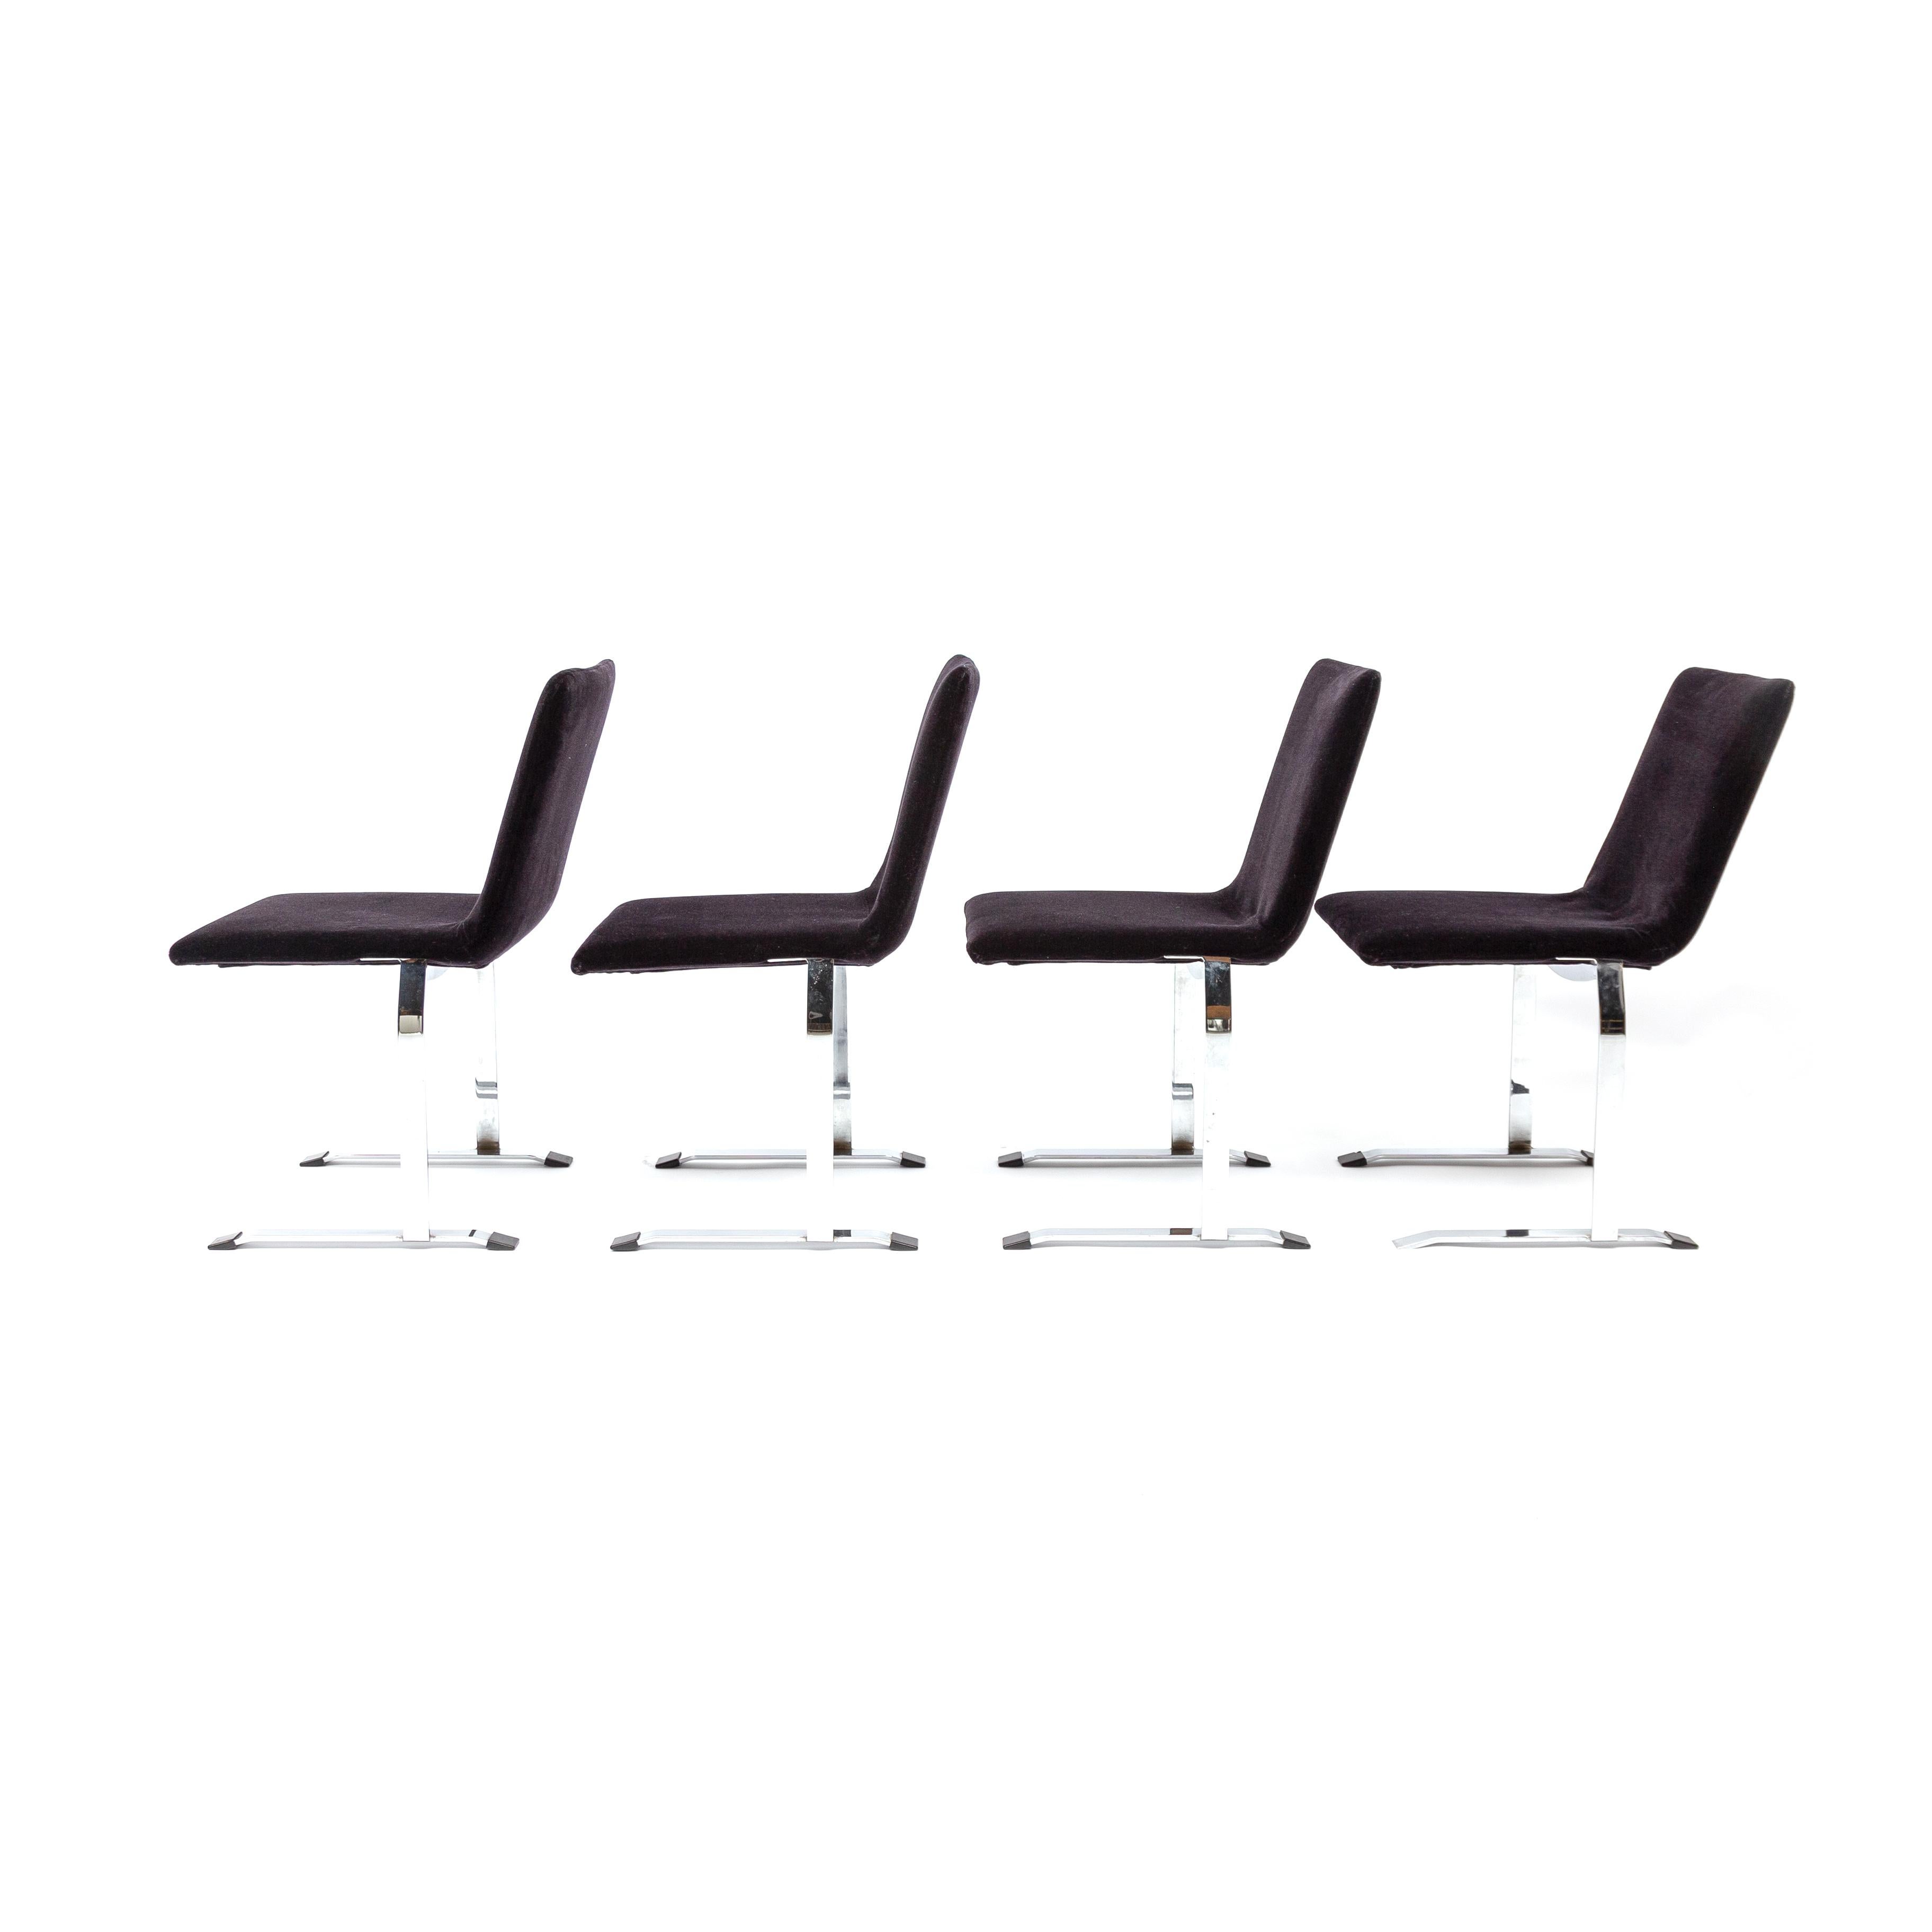 Distinctive & expressive steel sled bases with bright, chrome plated finish and airy, cantilevered form. All four original black plastic feet present. Solid, sturdy, and comfortable. Recently reupholstered in a beautiful black mohair velvet. 

No